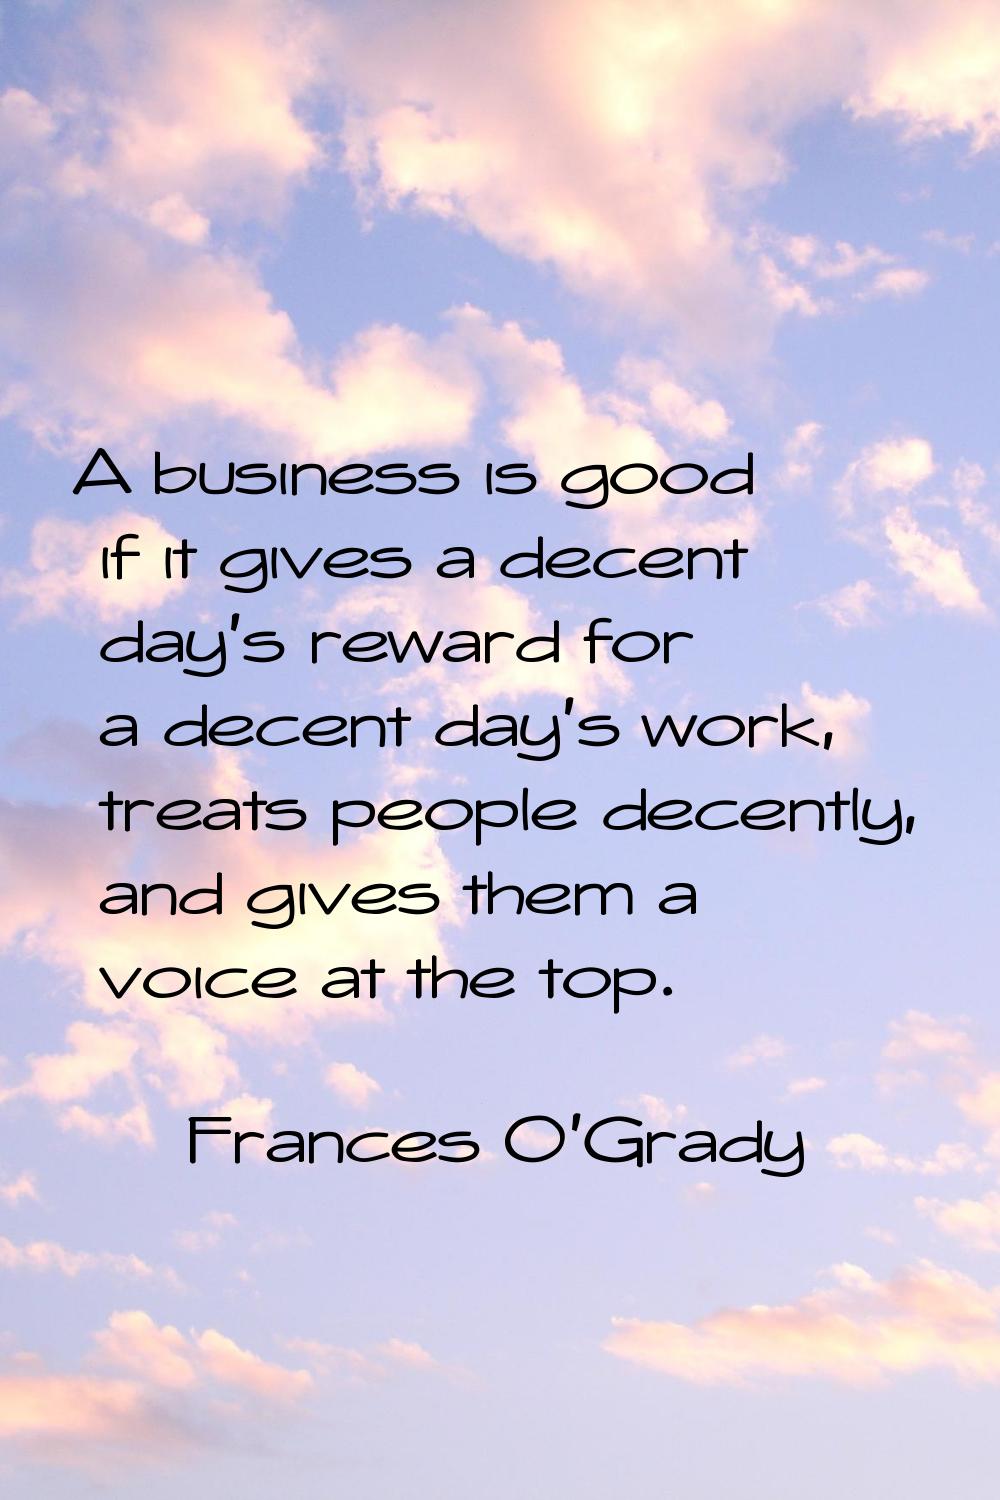 A business is good if it gives a decent day's reward for a decent day's work, treats people decentl